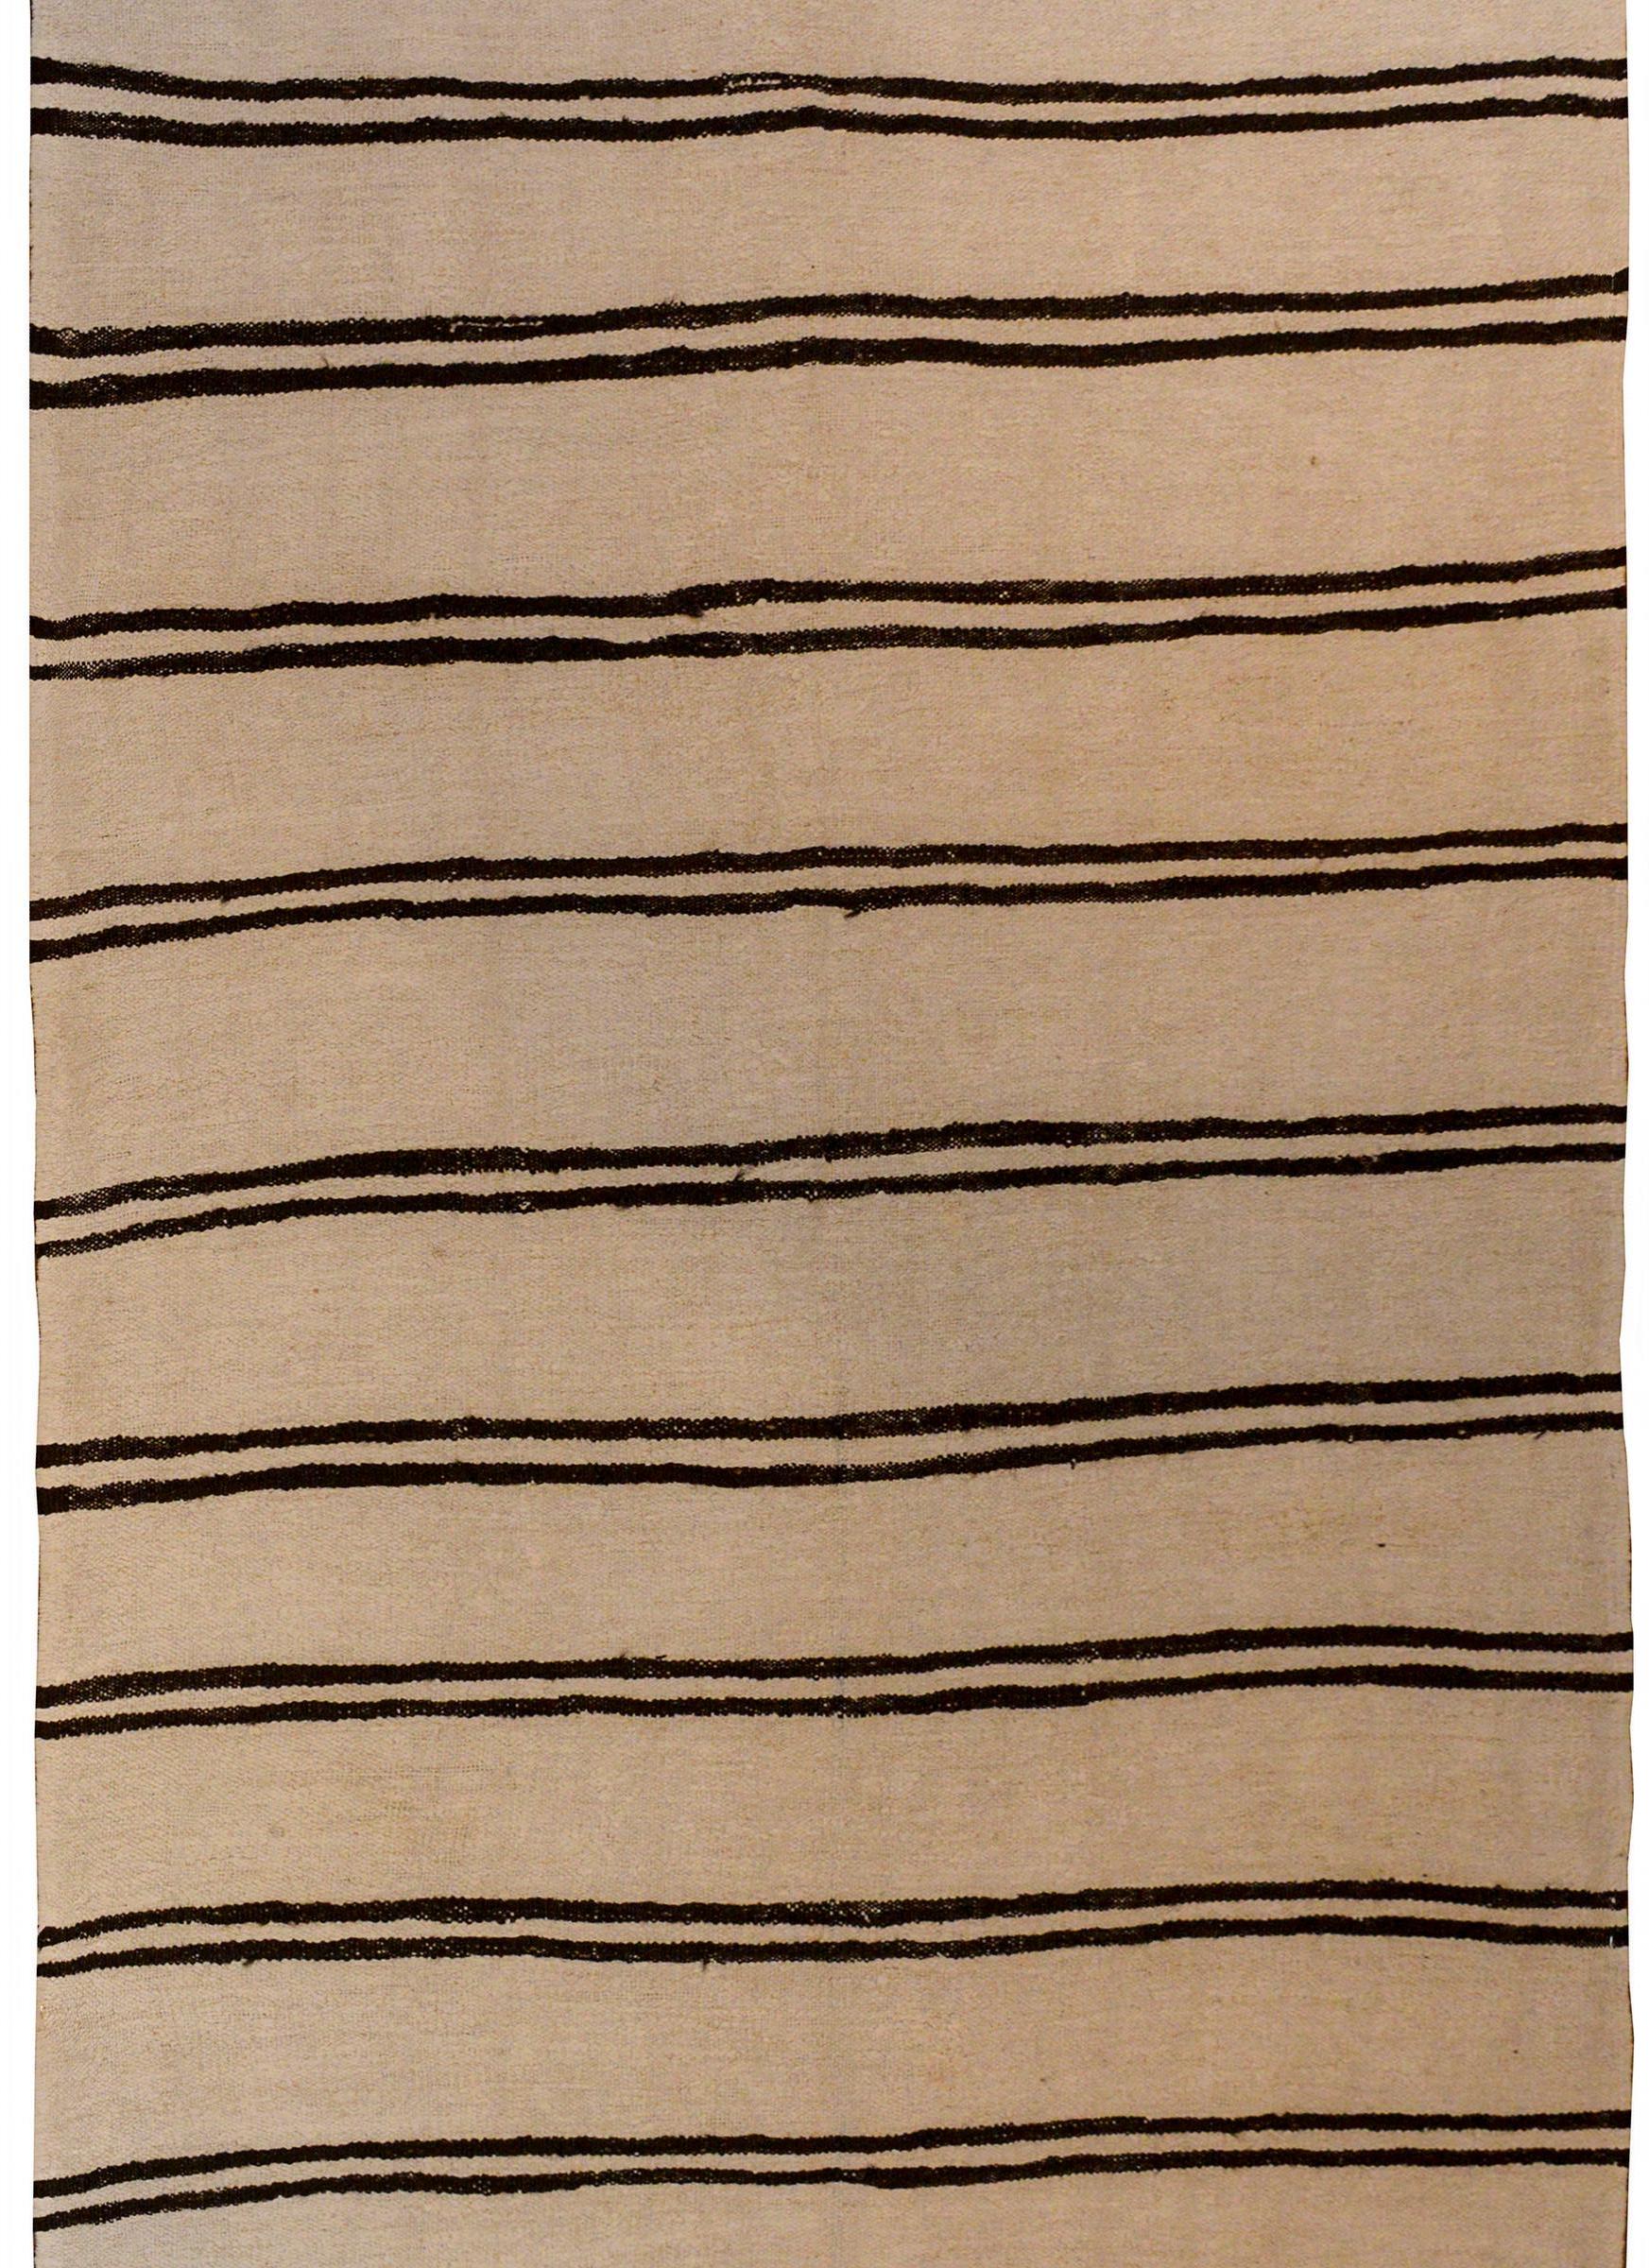 A vintage Turkish Konya handwoven cotton kilim rug with a cream field and multiple pairs of black stripes.